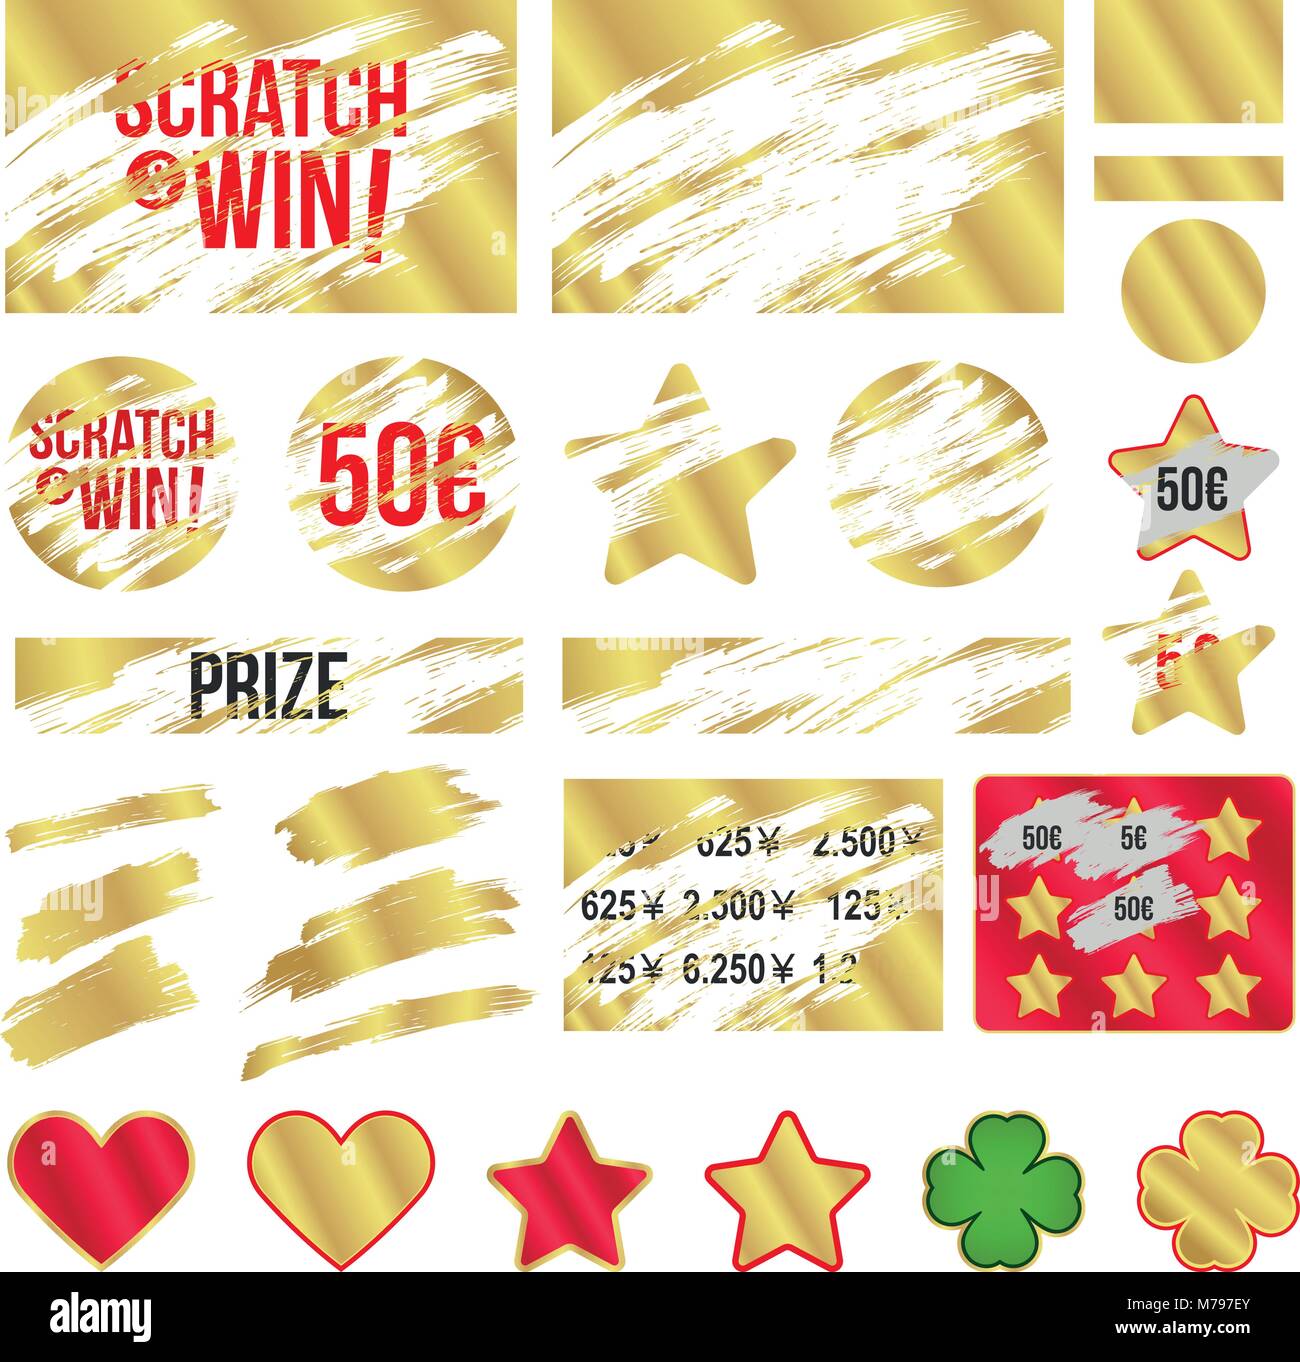 Letters scratch to win. With effect from scratch marks. Suitable for scratch card game and win. Gold effect. vector Stock Vector